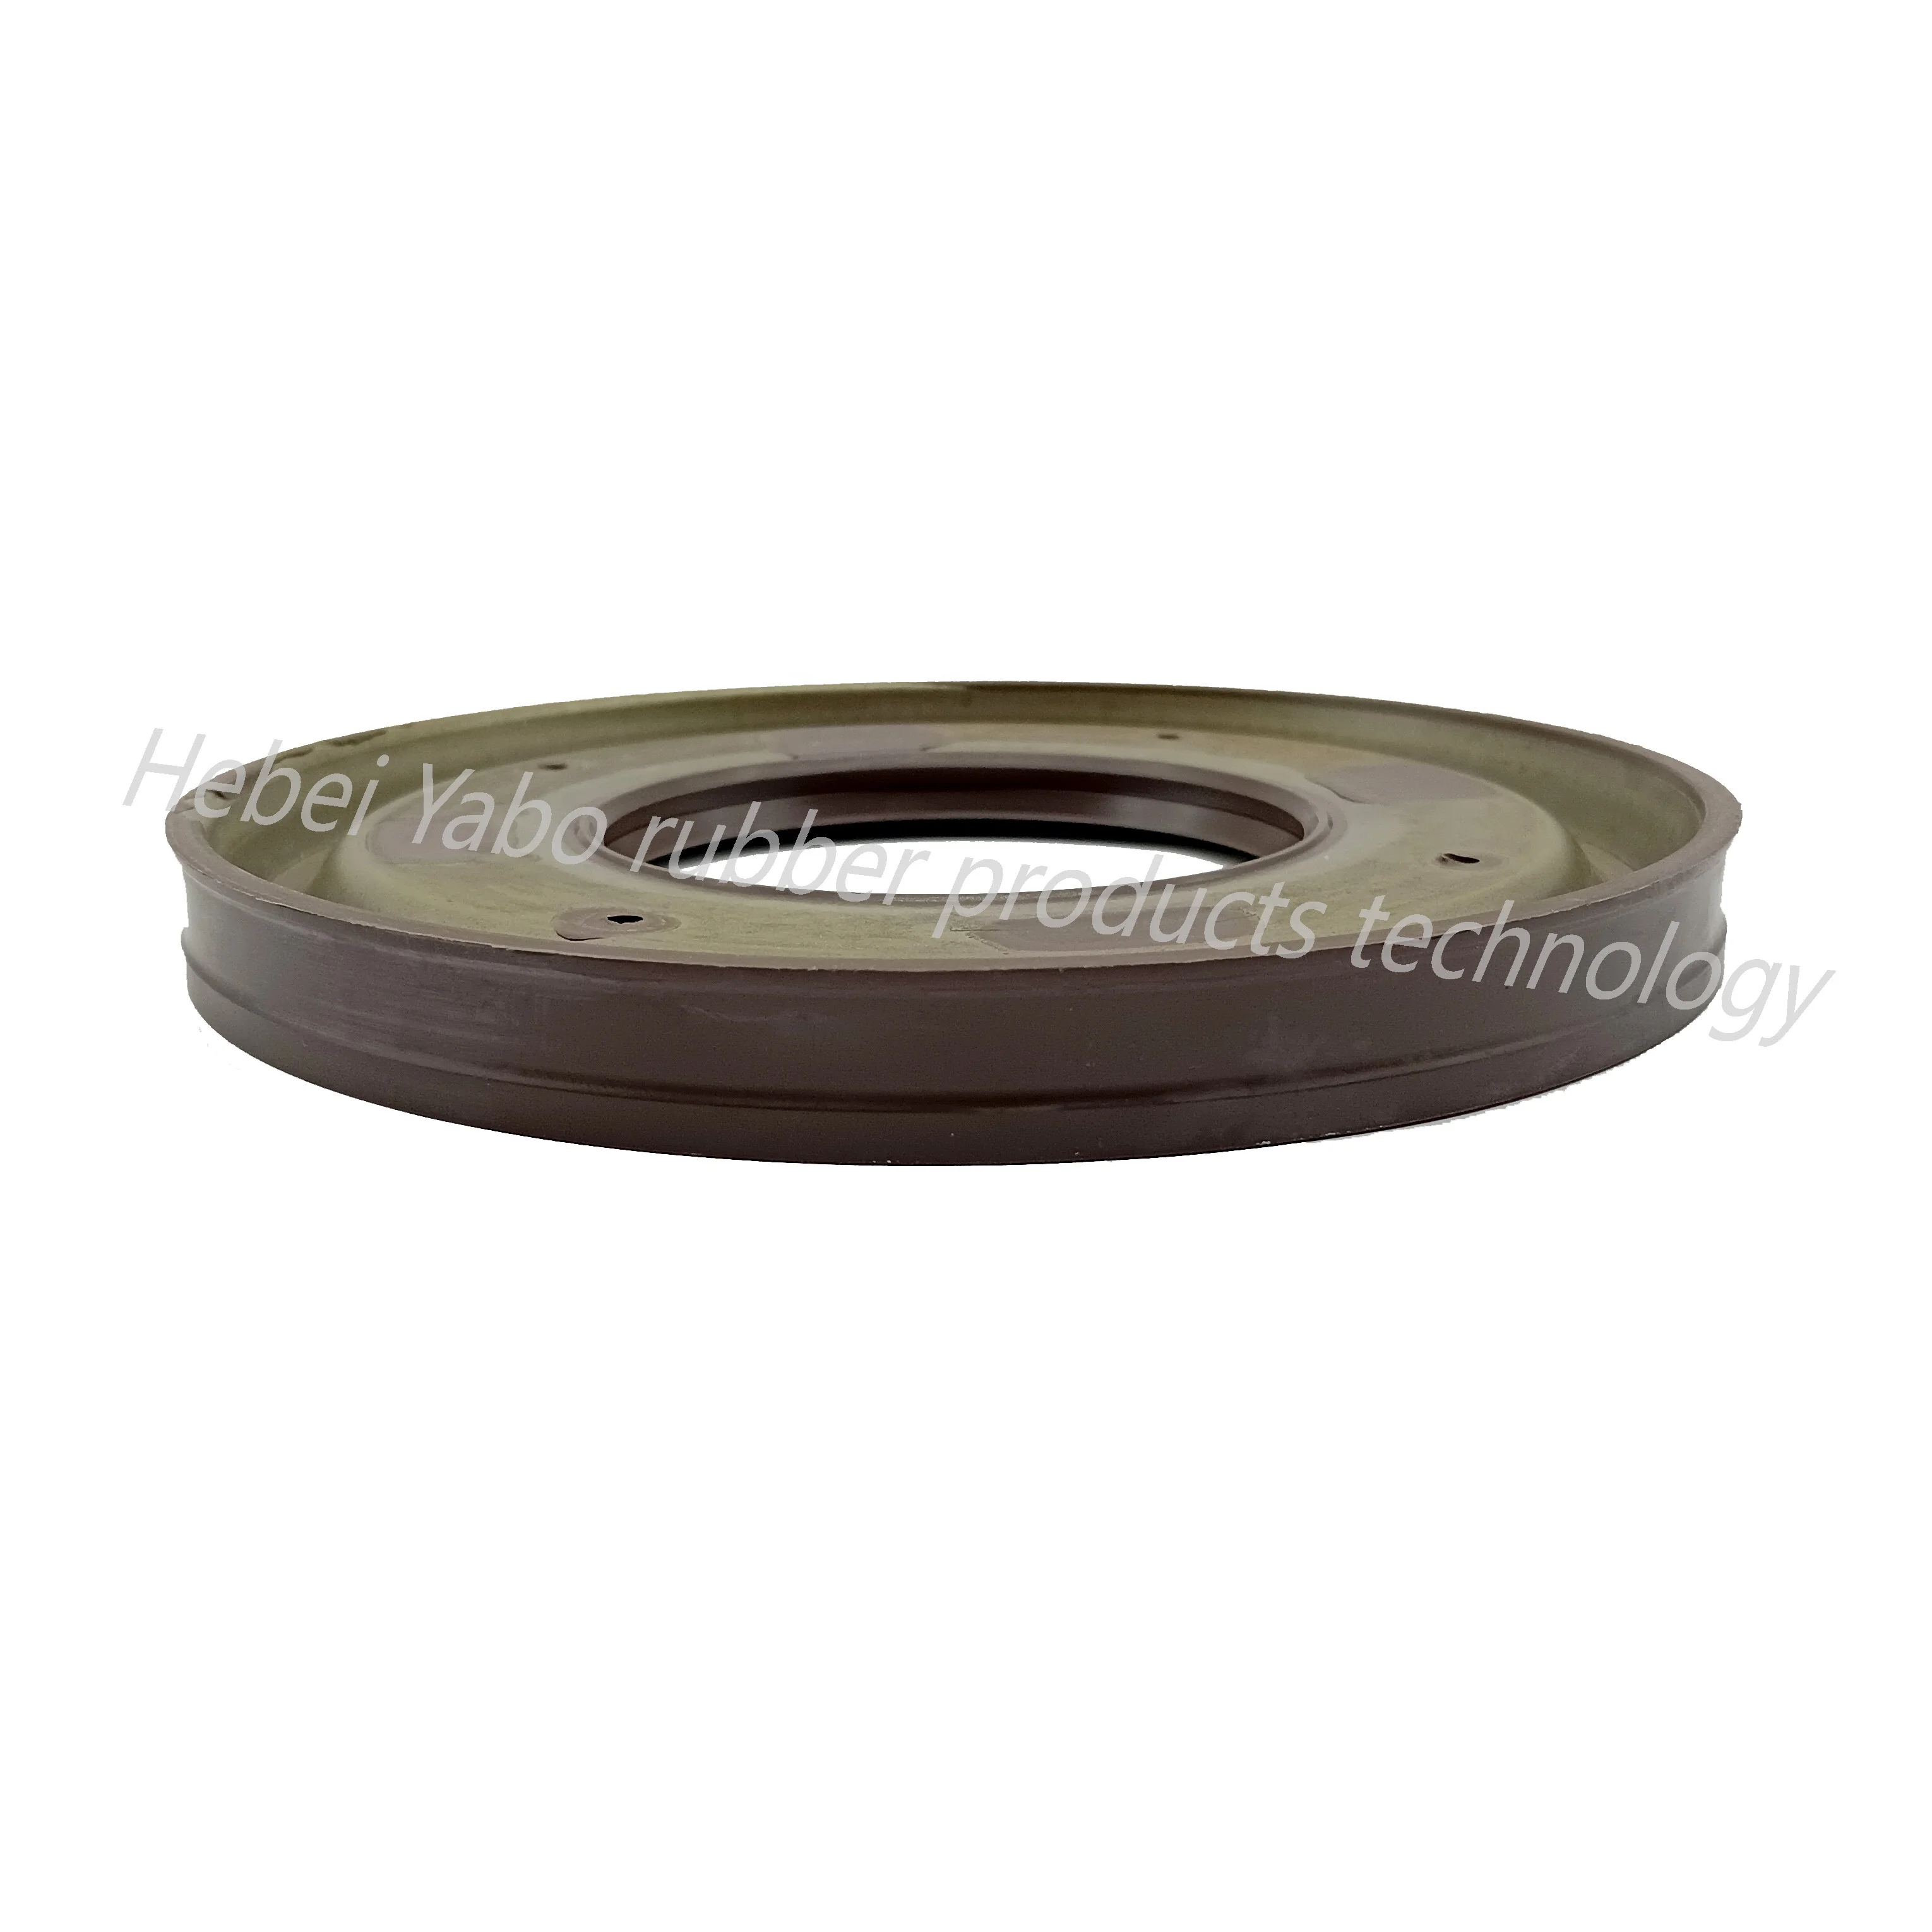 Hot sale TC3Y 78*163*16 OEM 1-09625-444-0 rubber seals Wheel Hub Oil Seal applicable to ISUZU